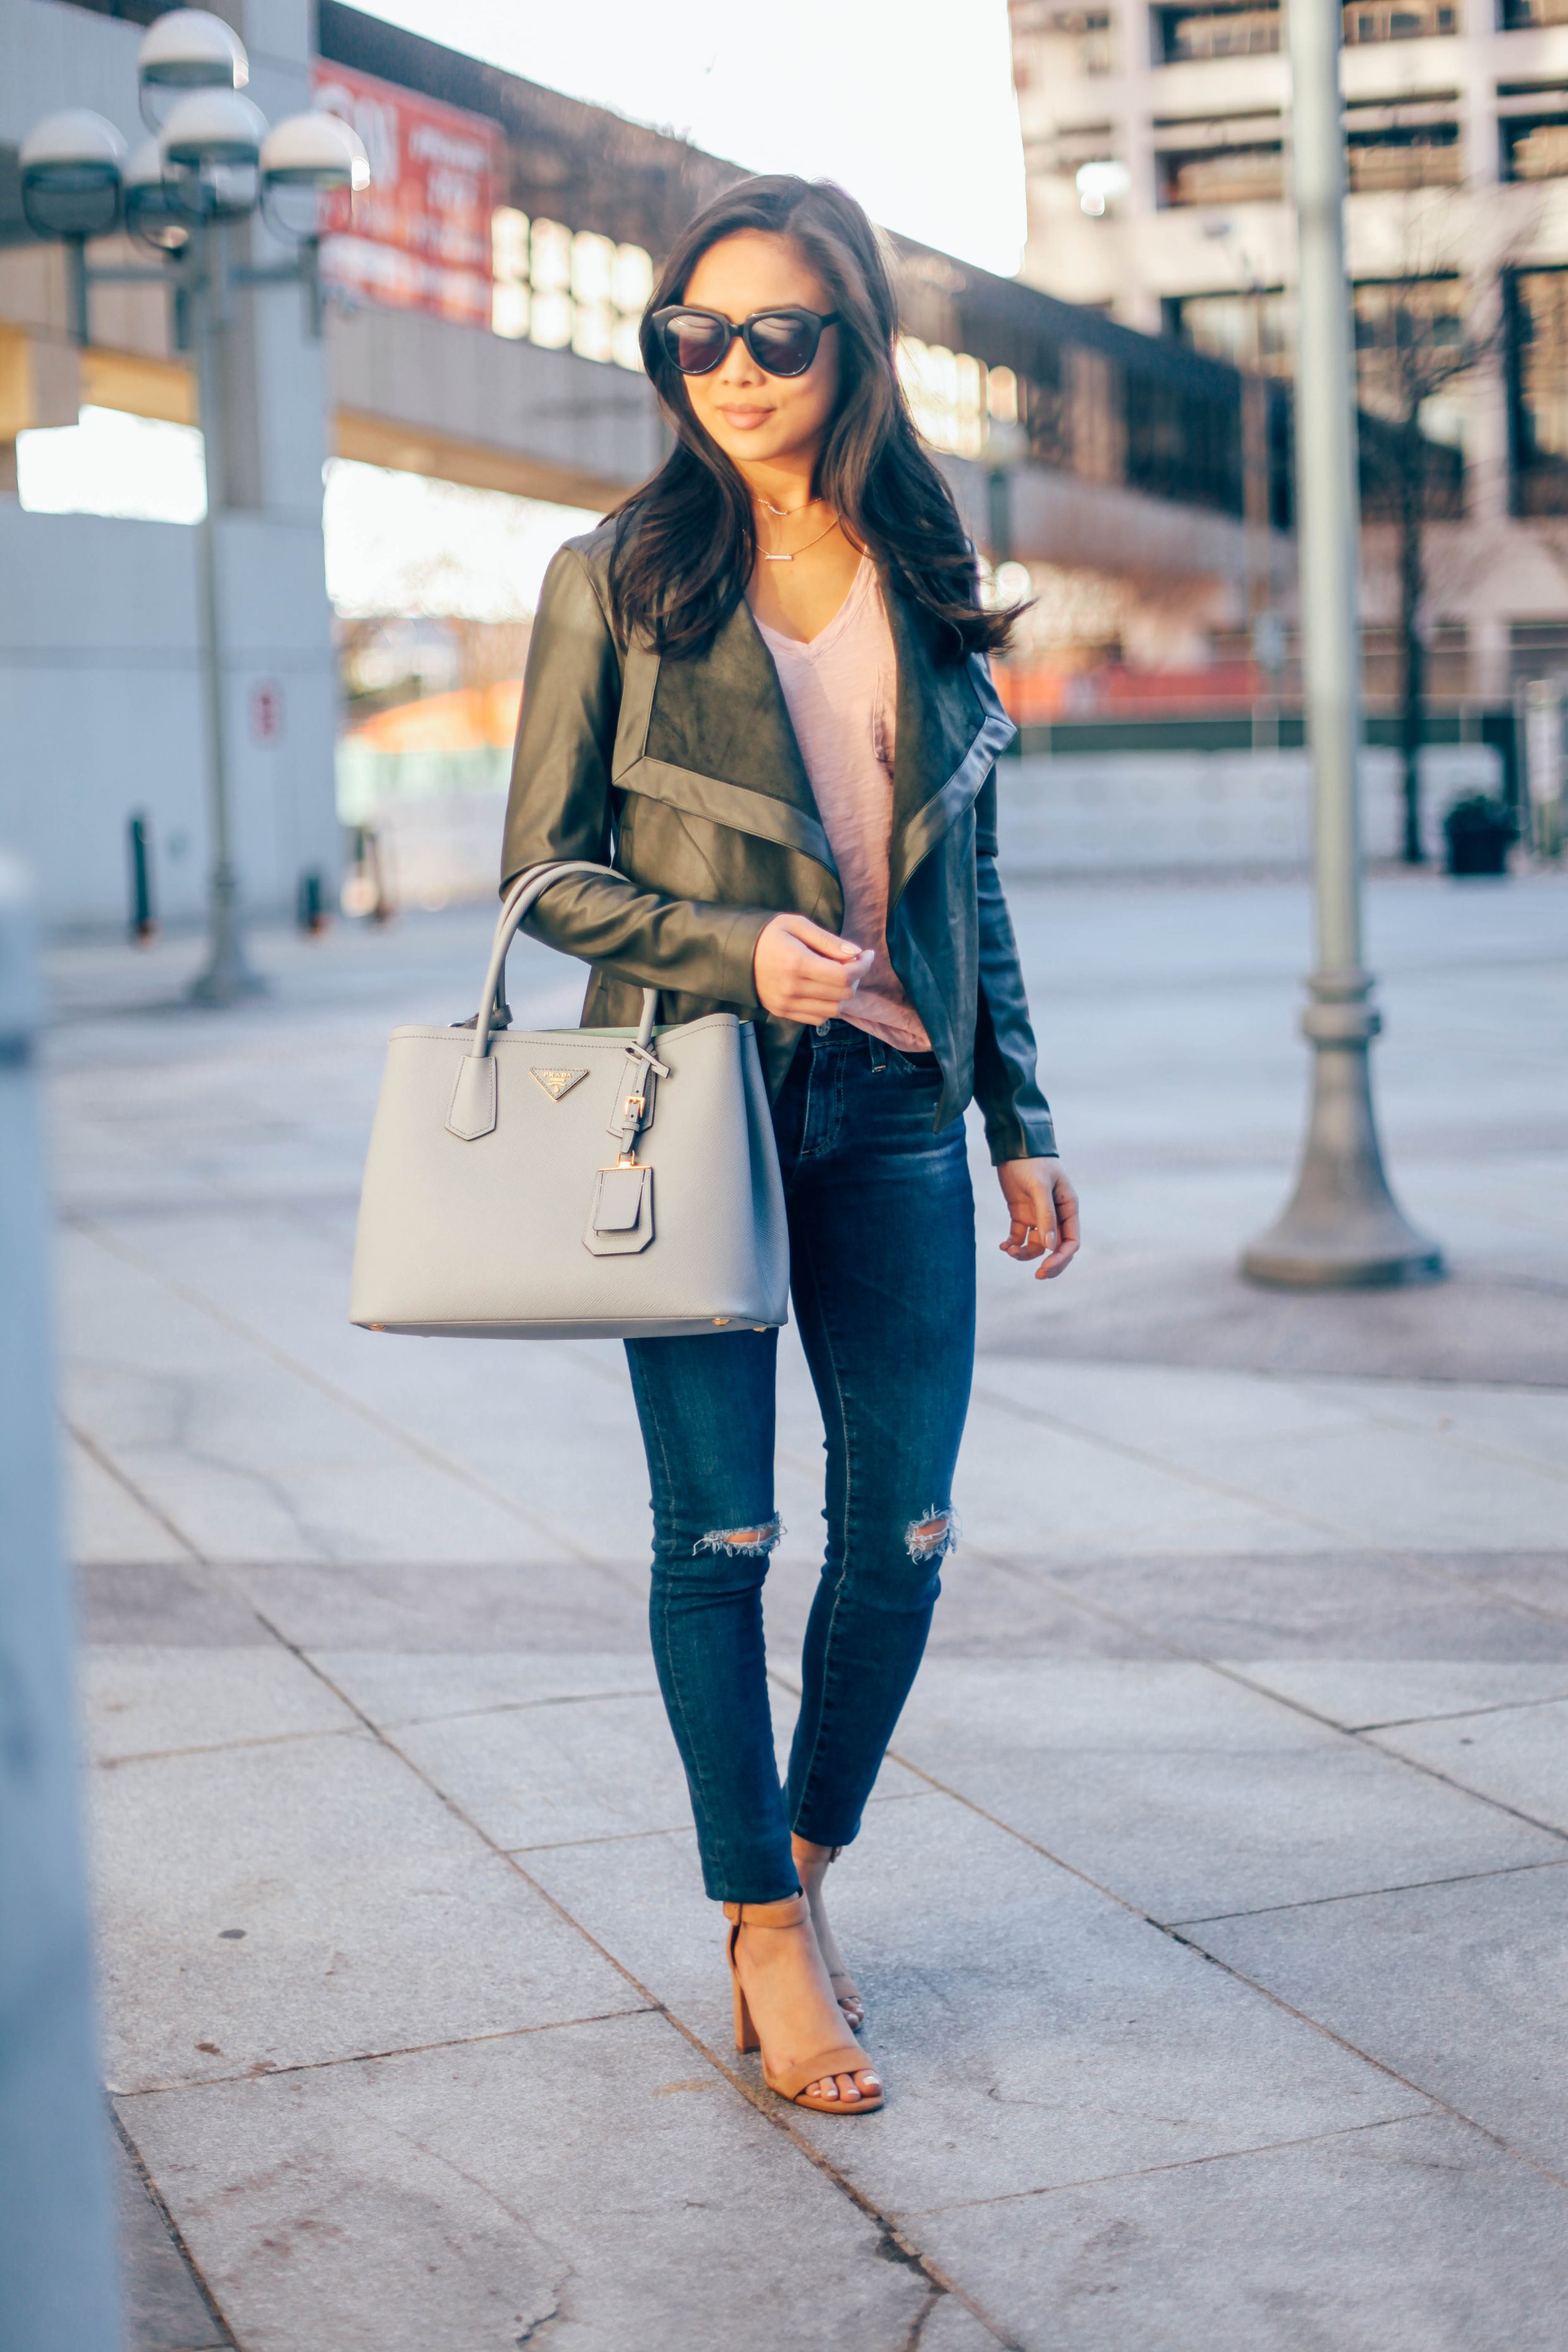 Blogger Hoang-Kim shares her tips for styling wardrobe basics for spring, including a leather jacket, tee and jeans